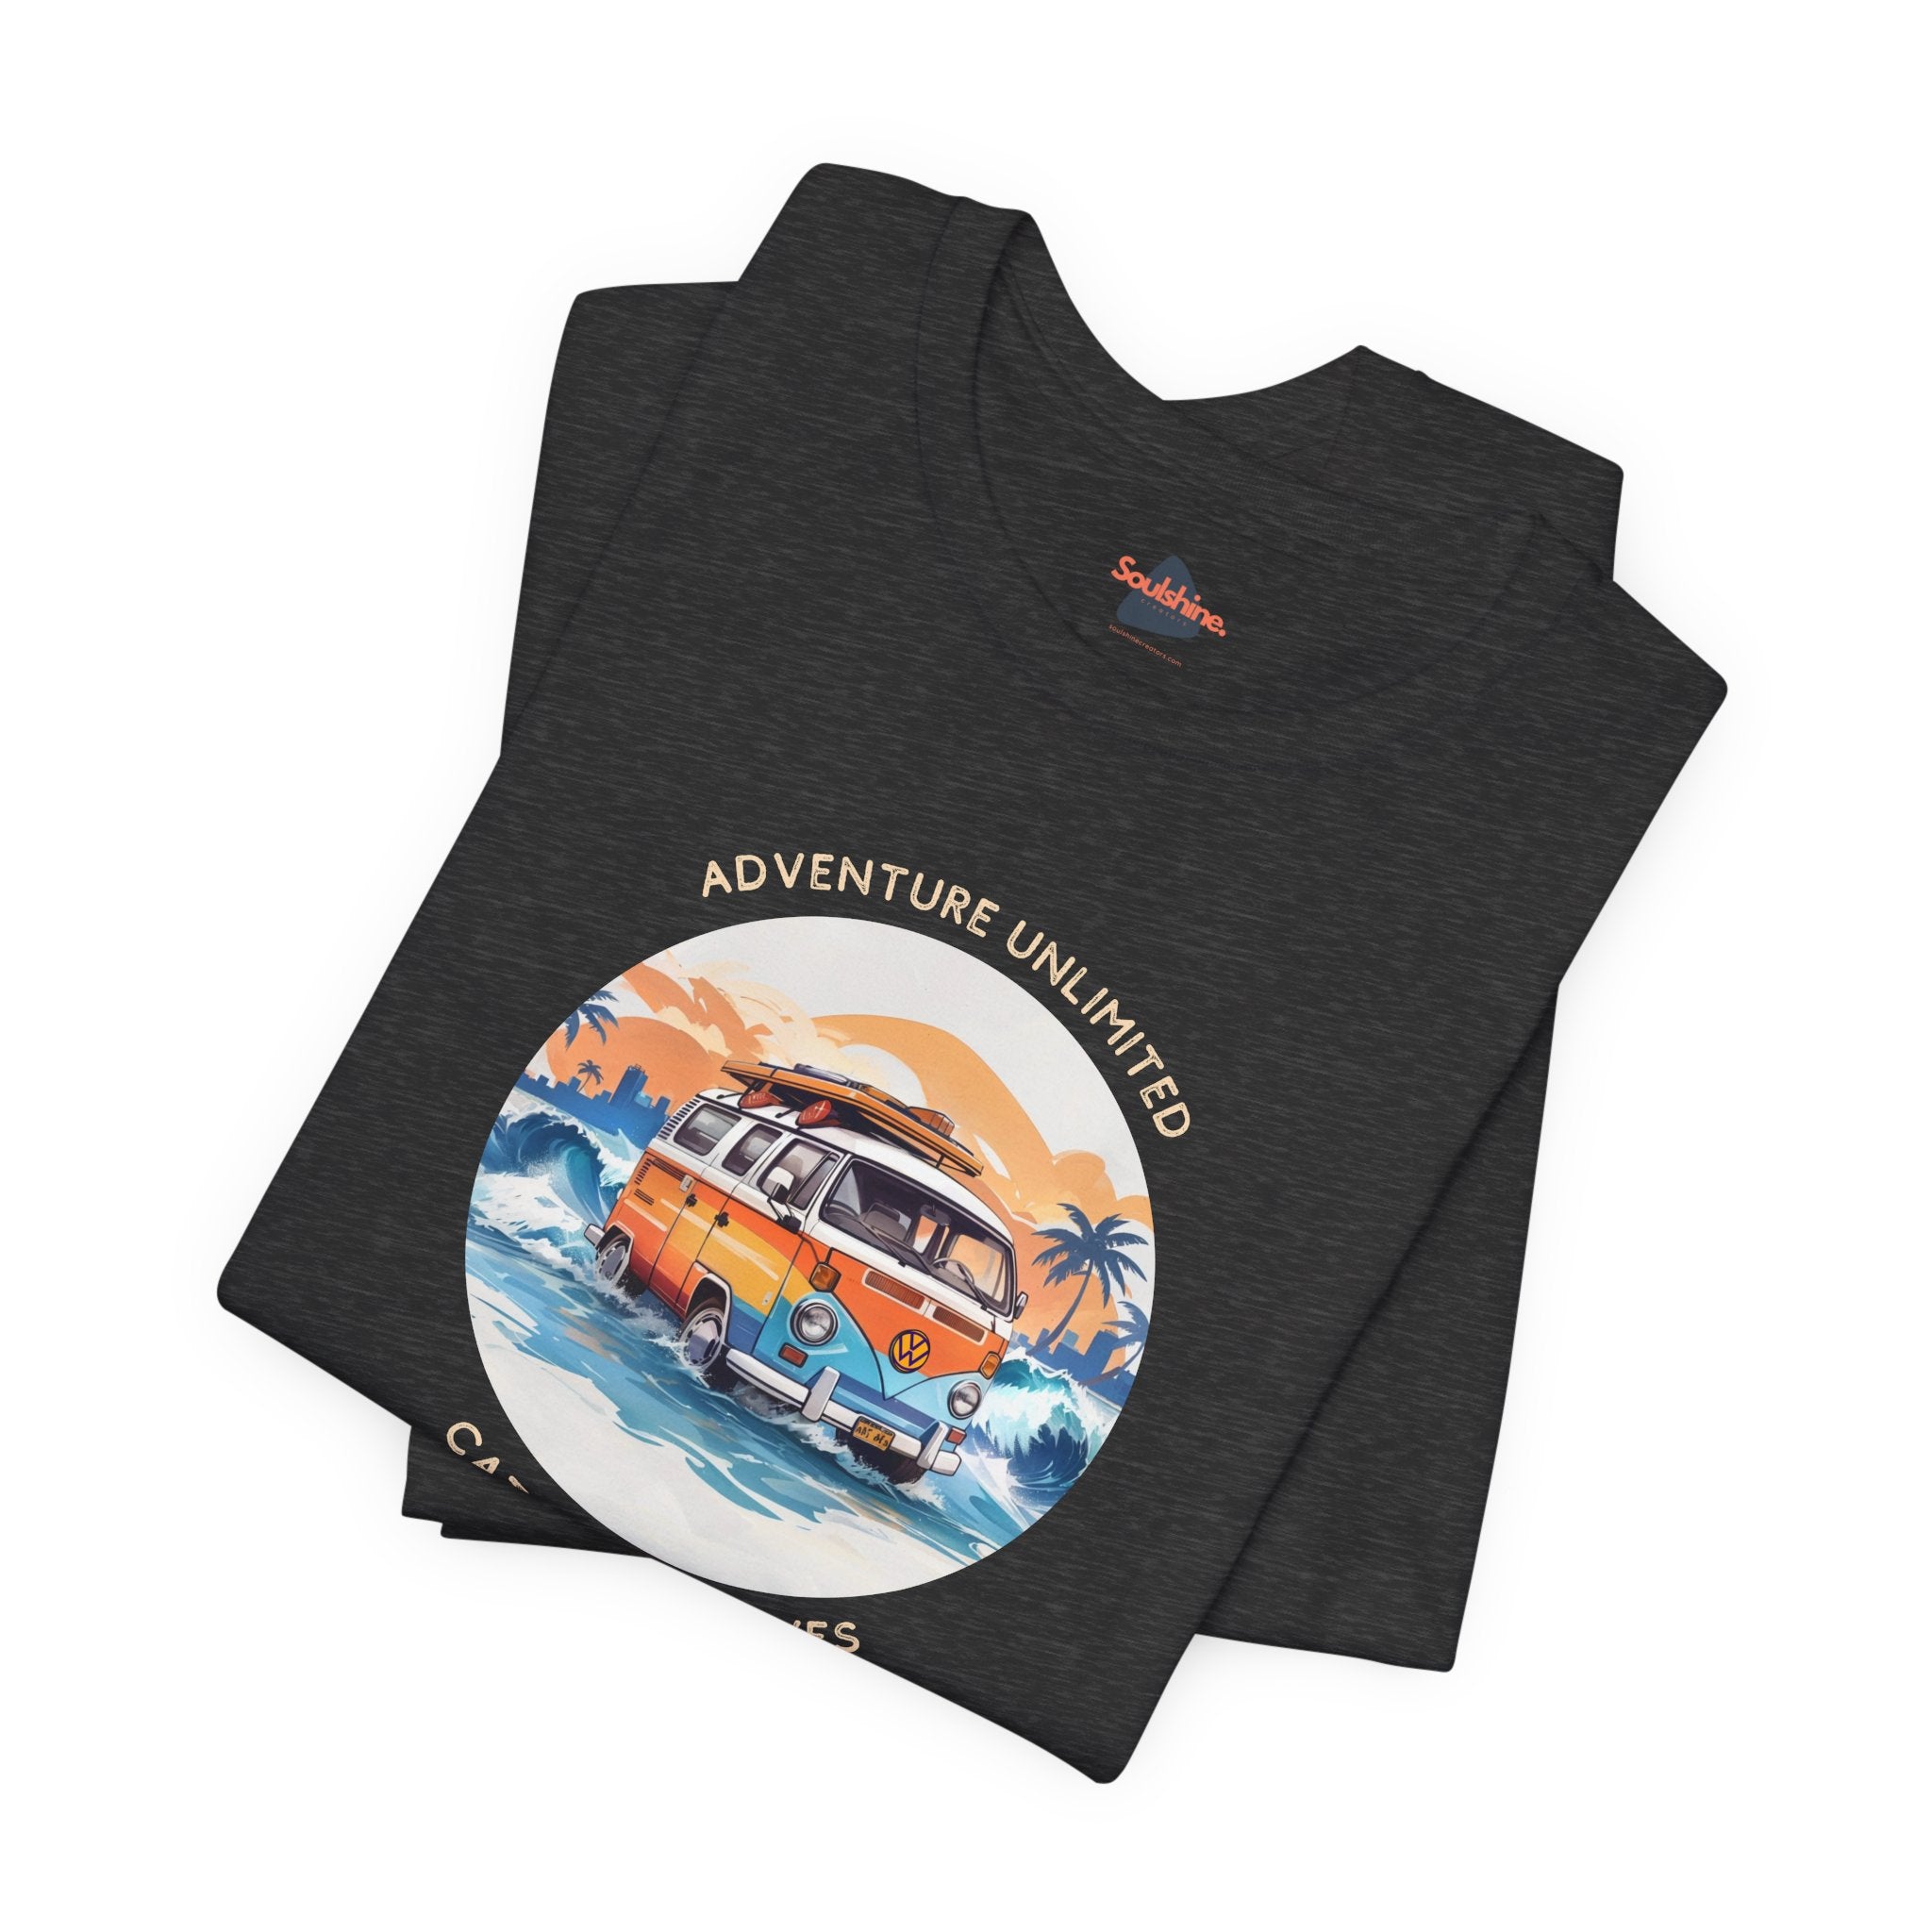 Adventure Unlimited black t-shirt with van and surfboard design, direct-to-garment printed item